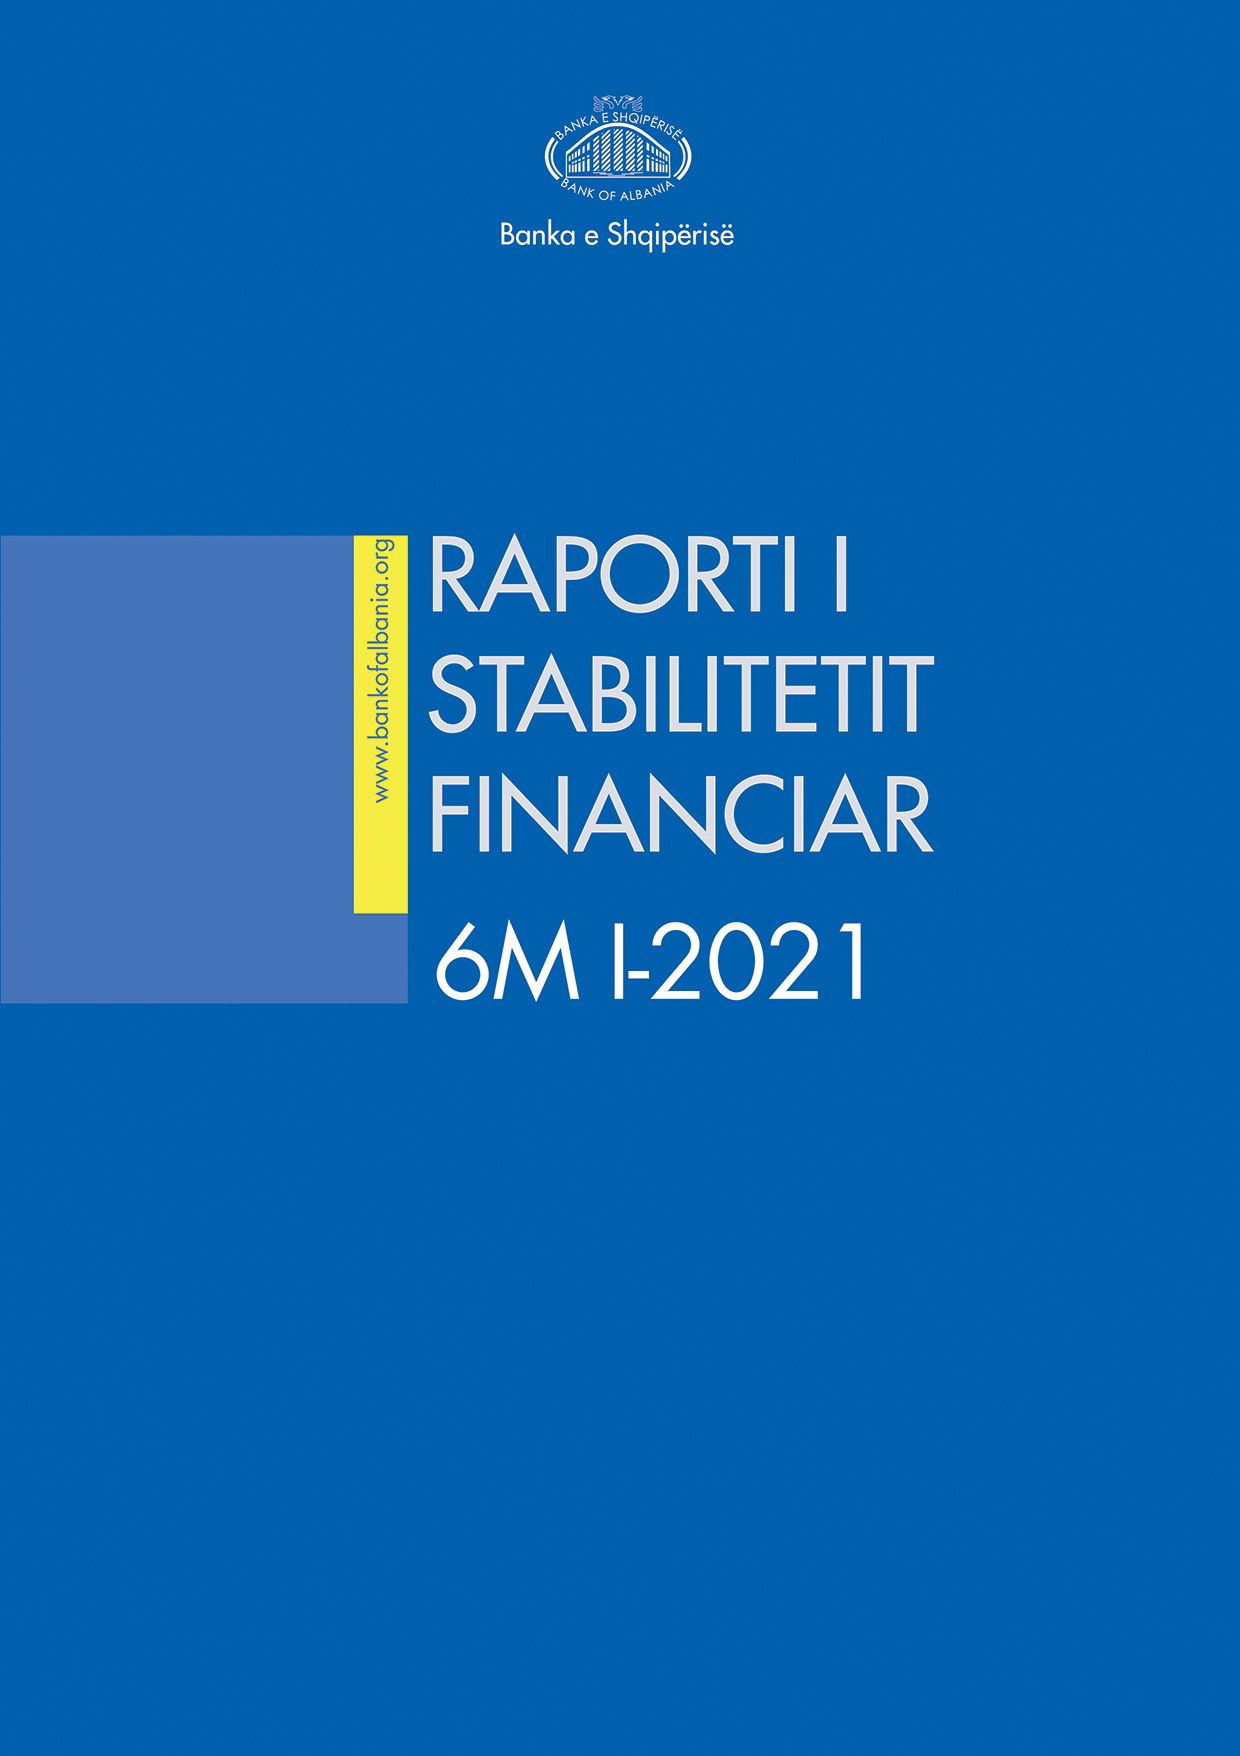 Financial Stability Report - 2021 H1